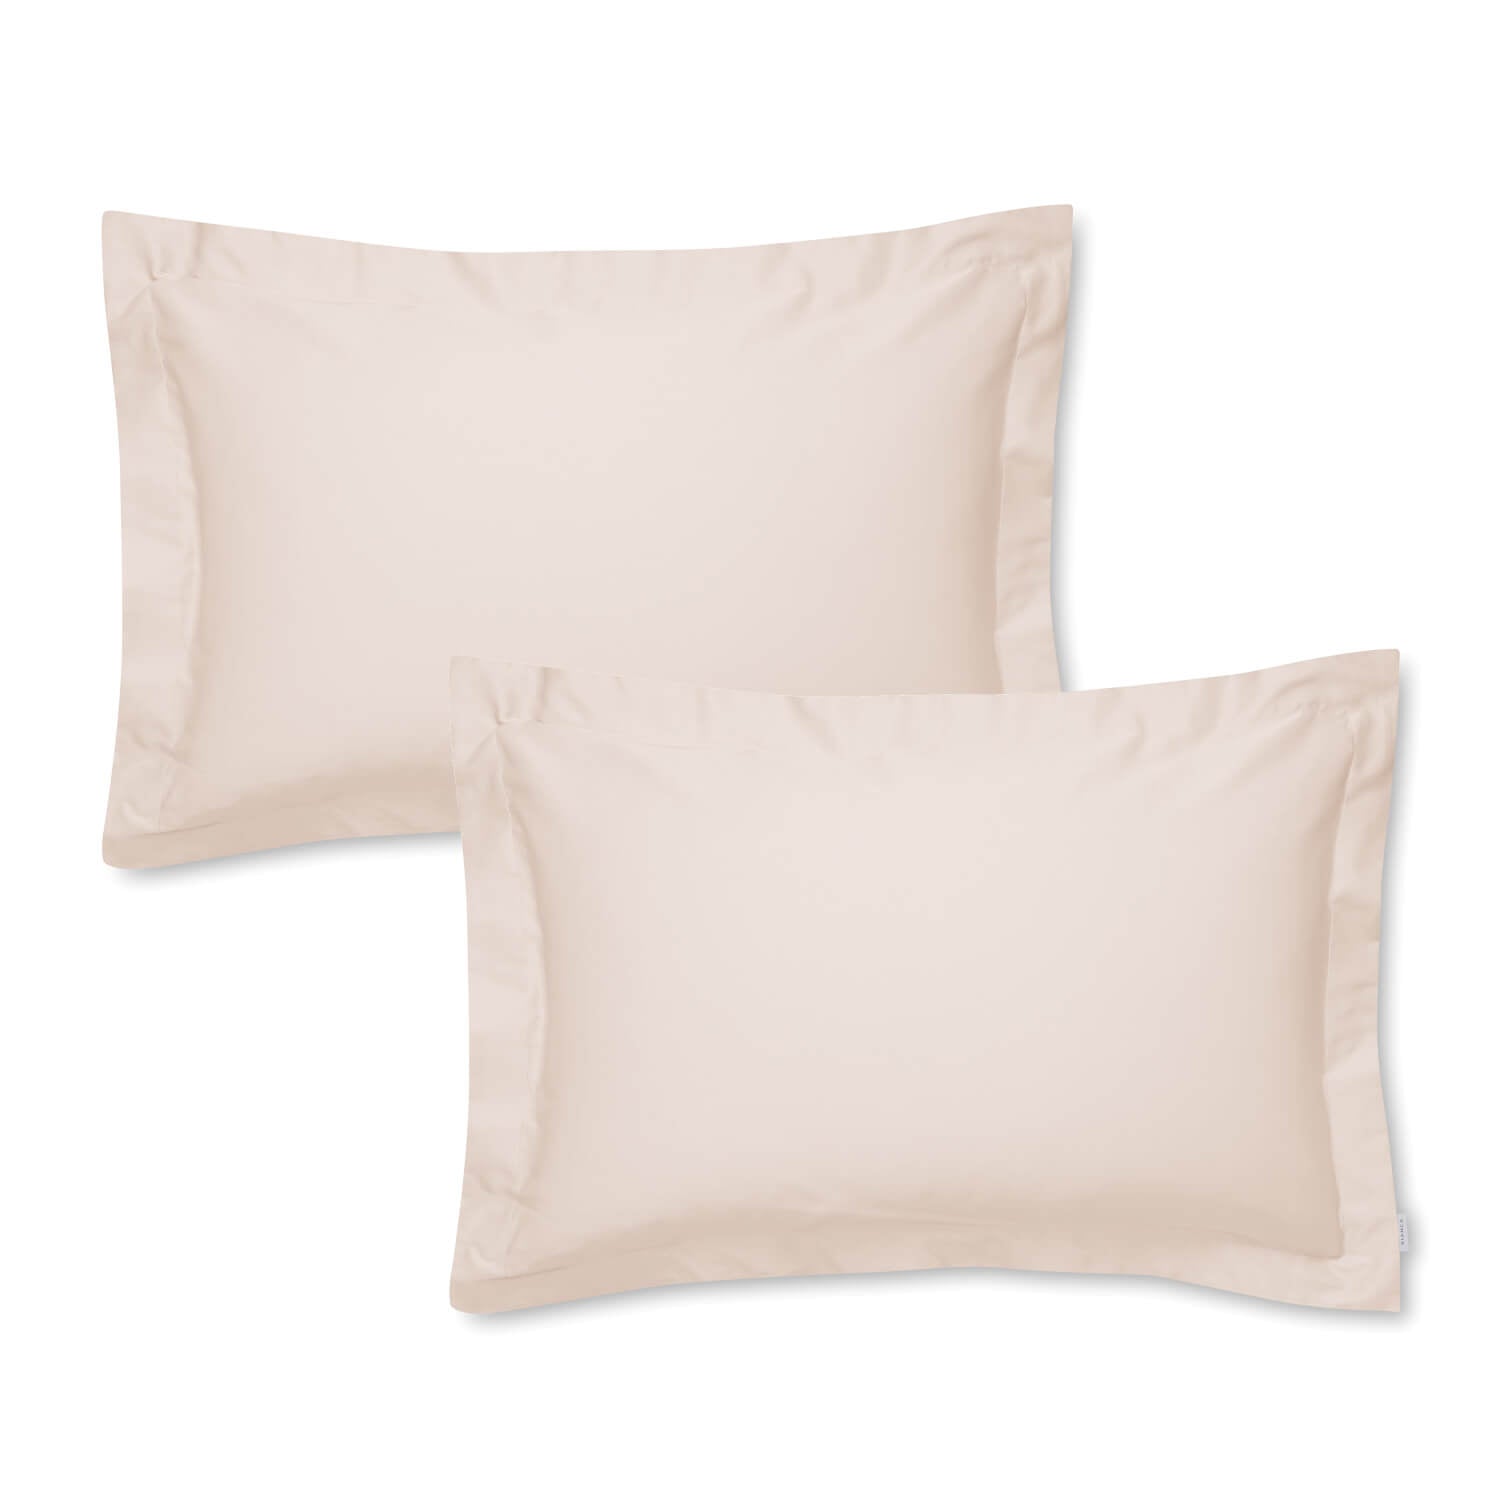 Bianca 400 Thread Count Cotton Sateen Oxford Pillowcase Pair - Oyster 1 Shaws Department Stores